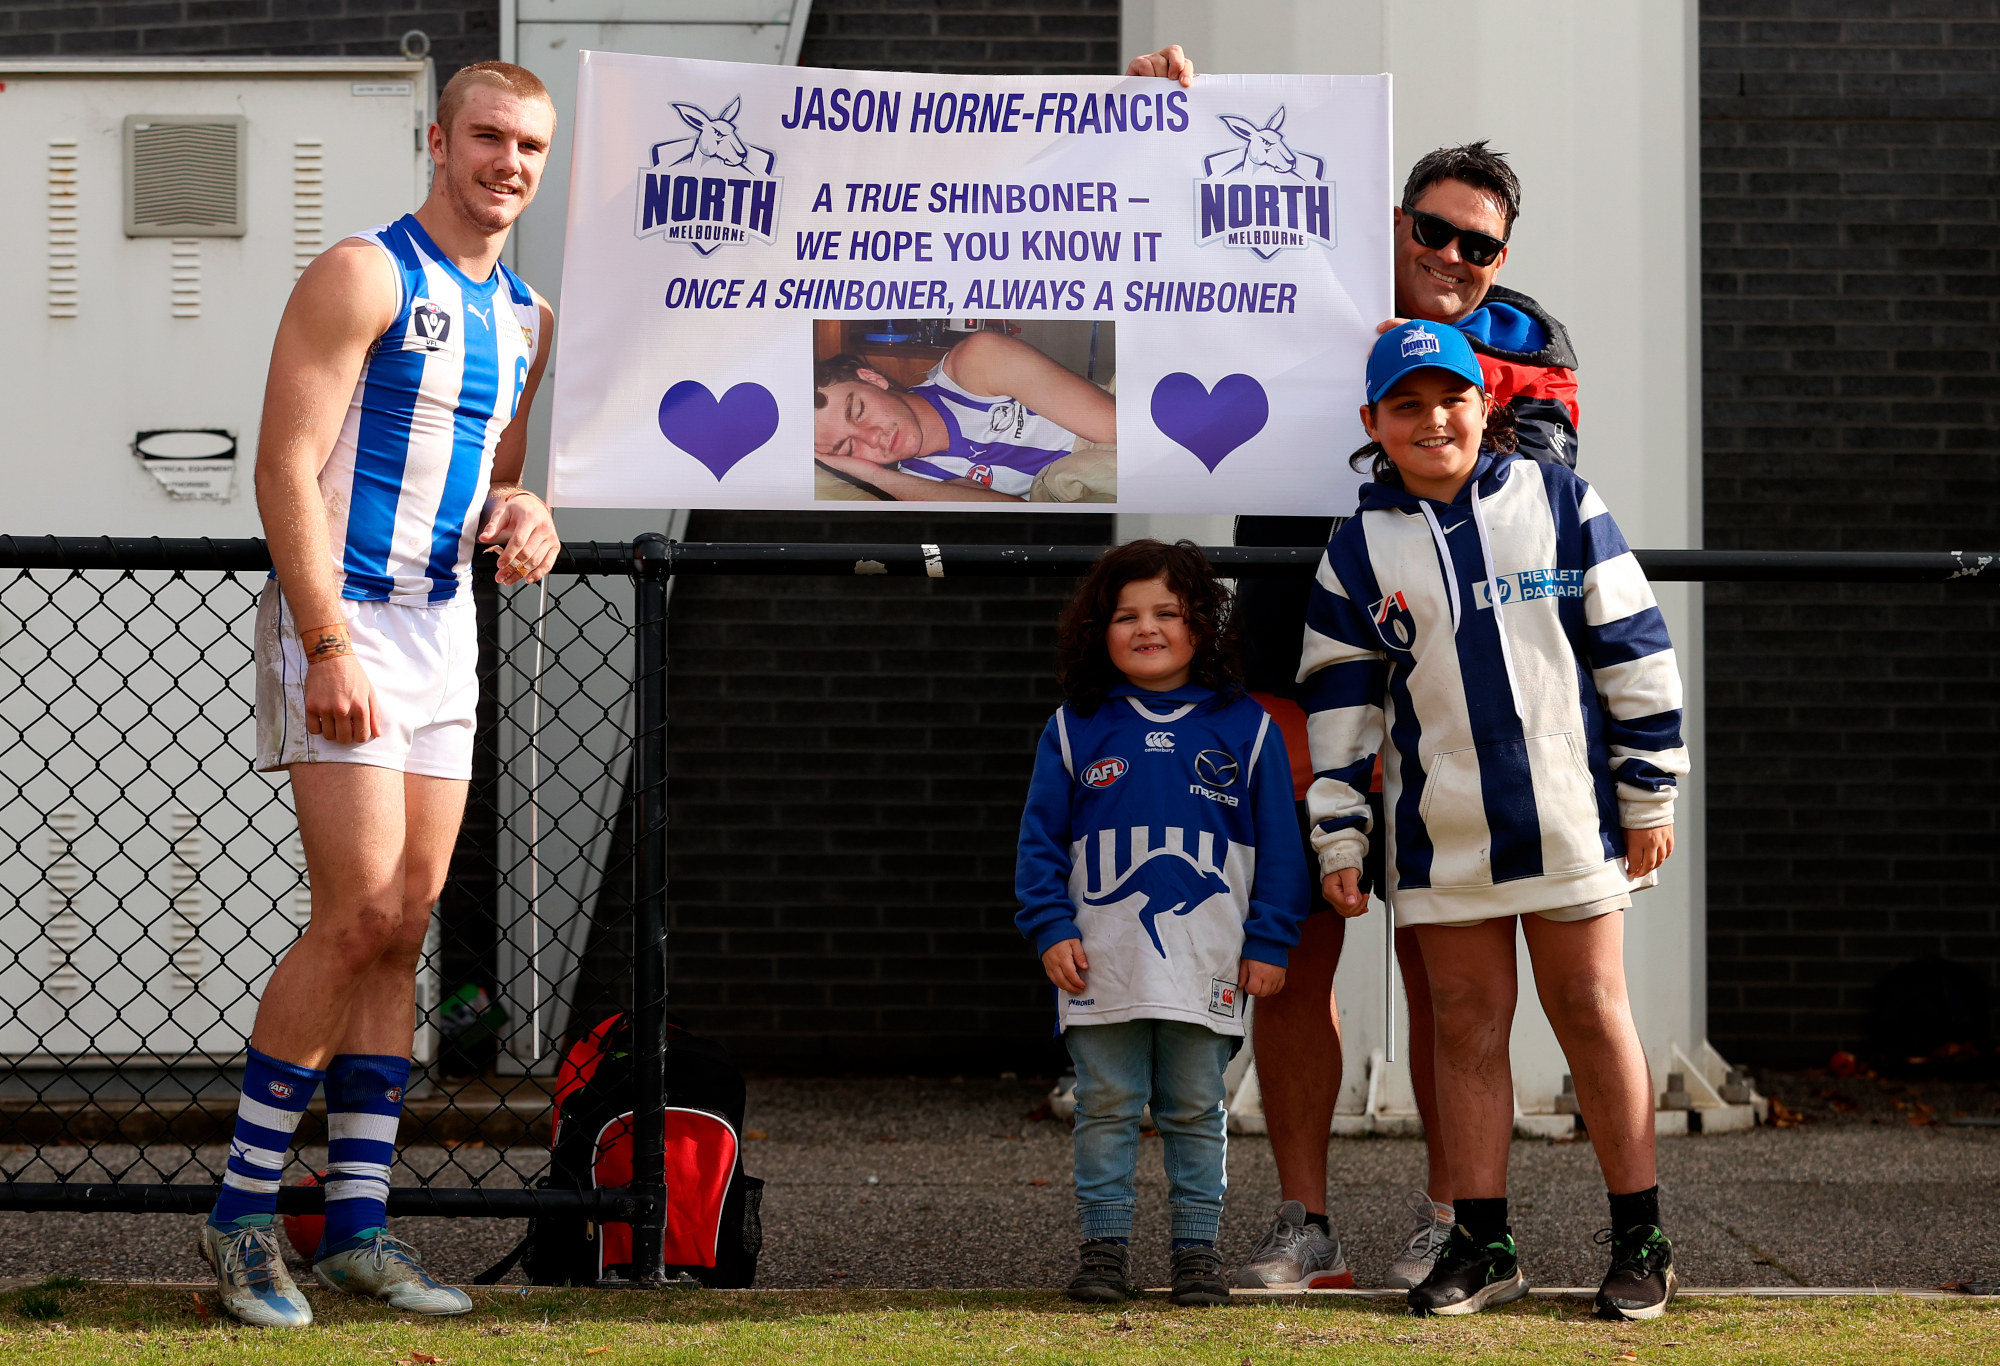 Jason Horne-Francis poses for a photo with North Melbourne supporters.